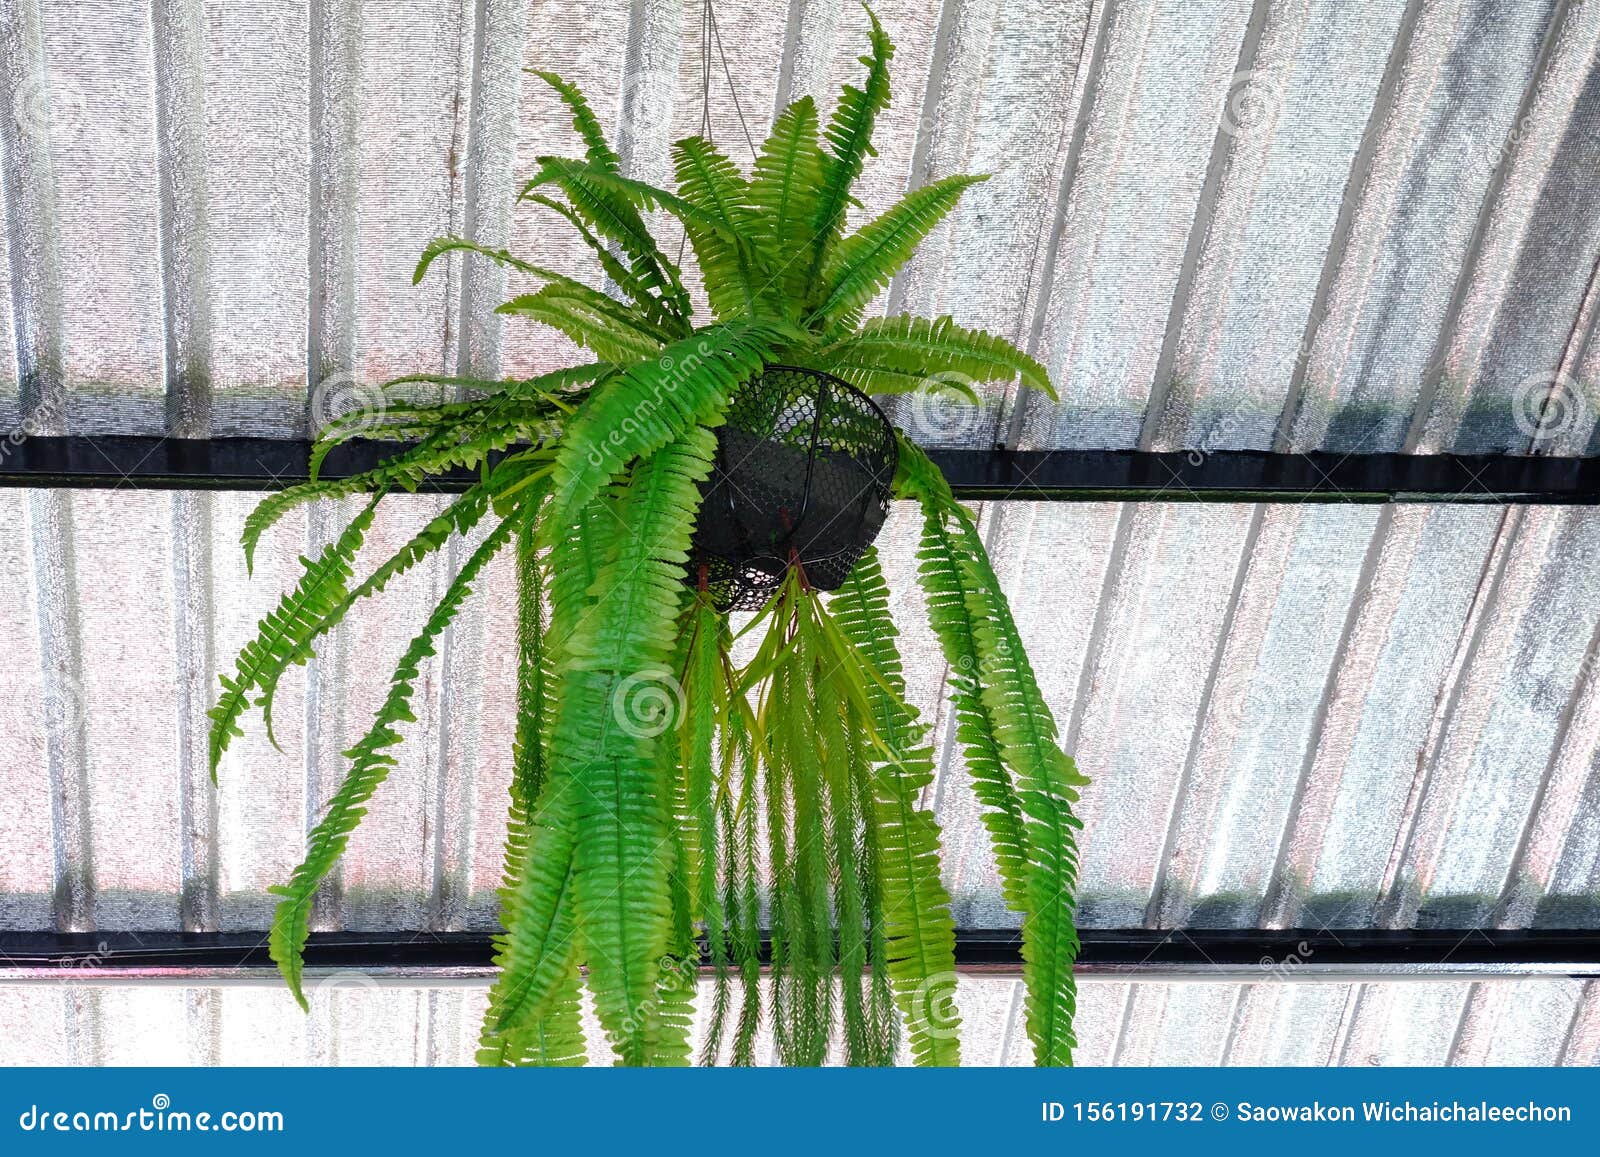 A Pot Of Tropical Fern Plant Hanging From The Building